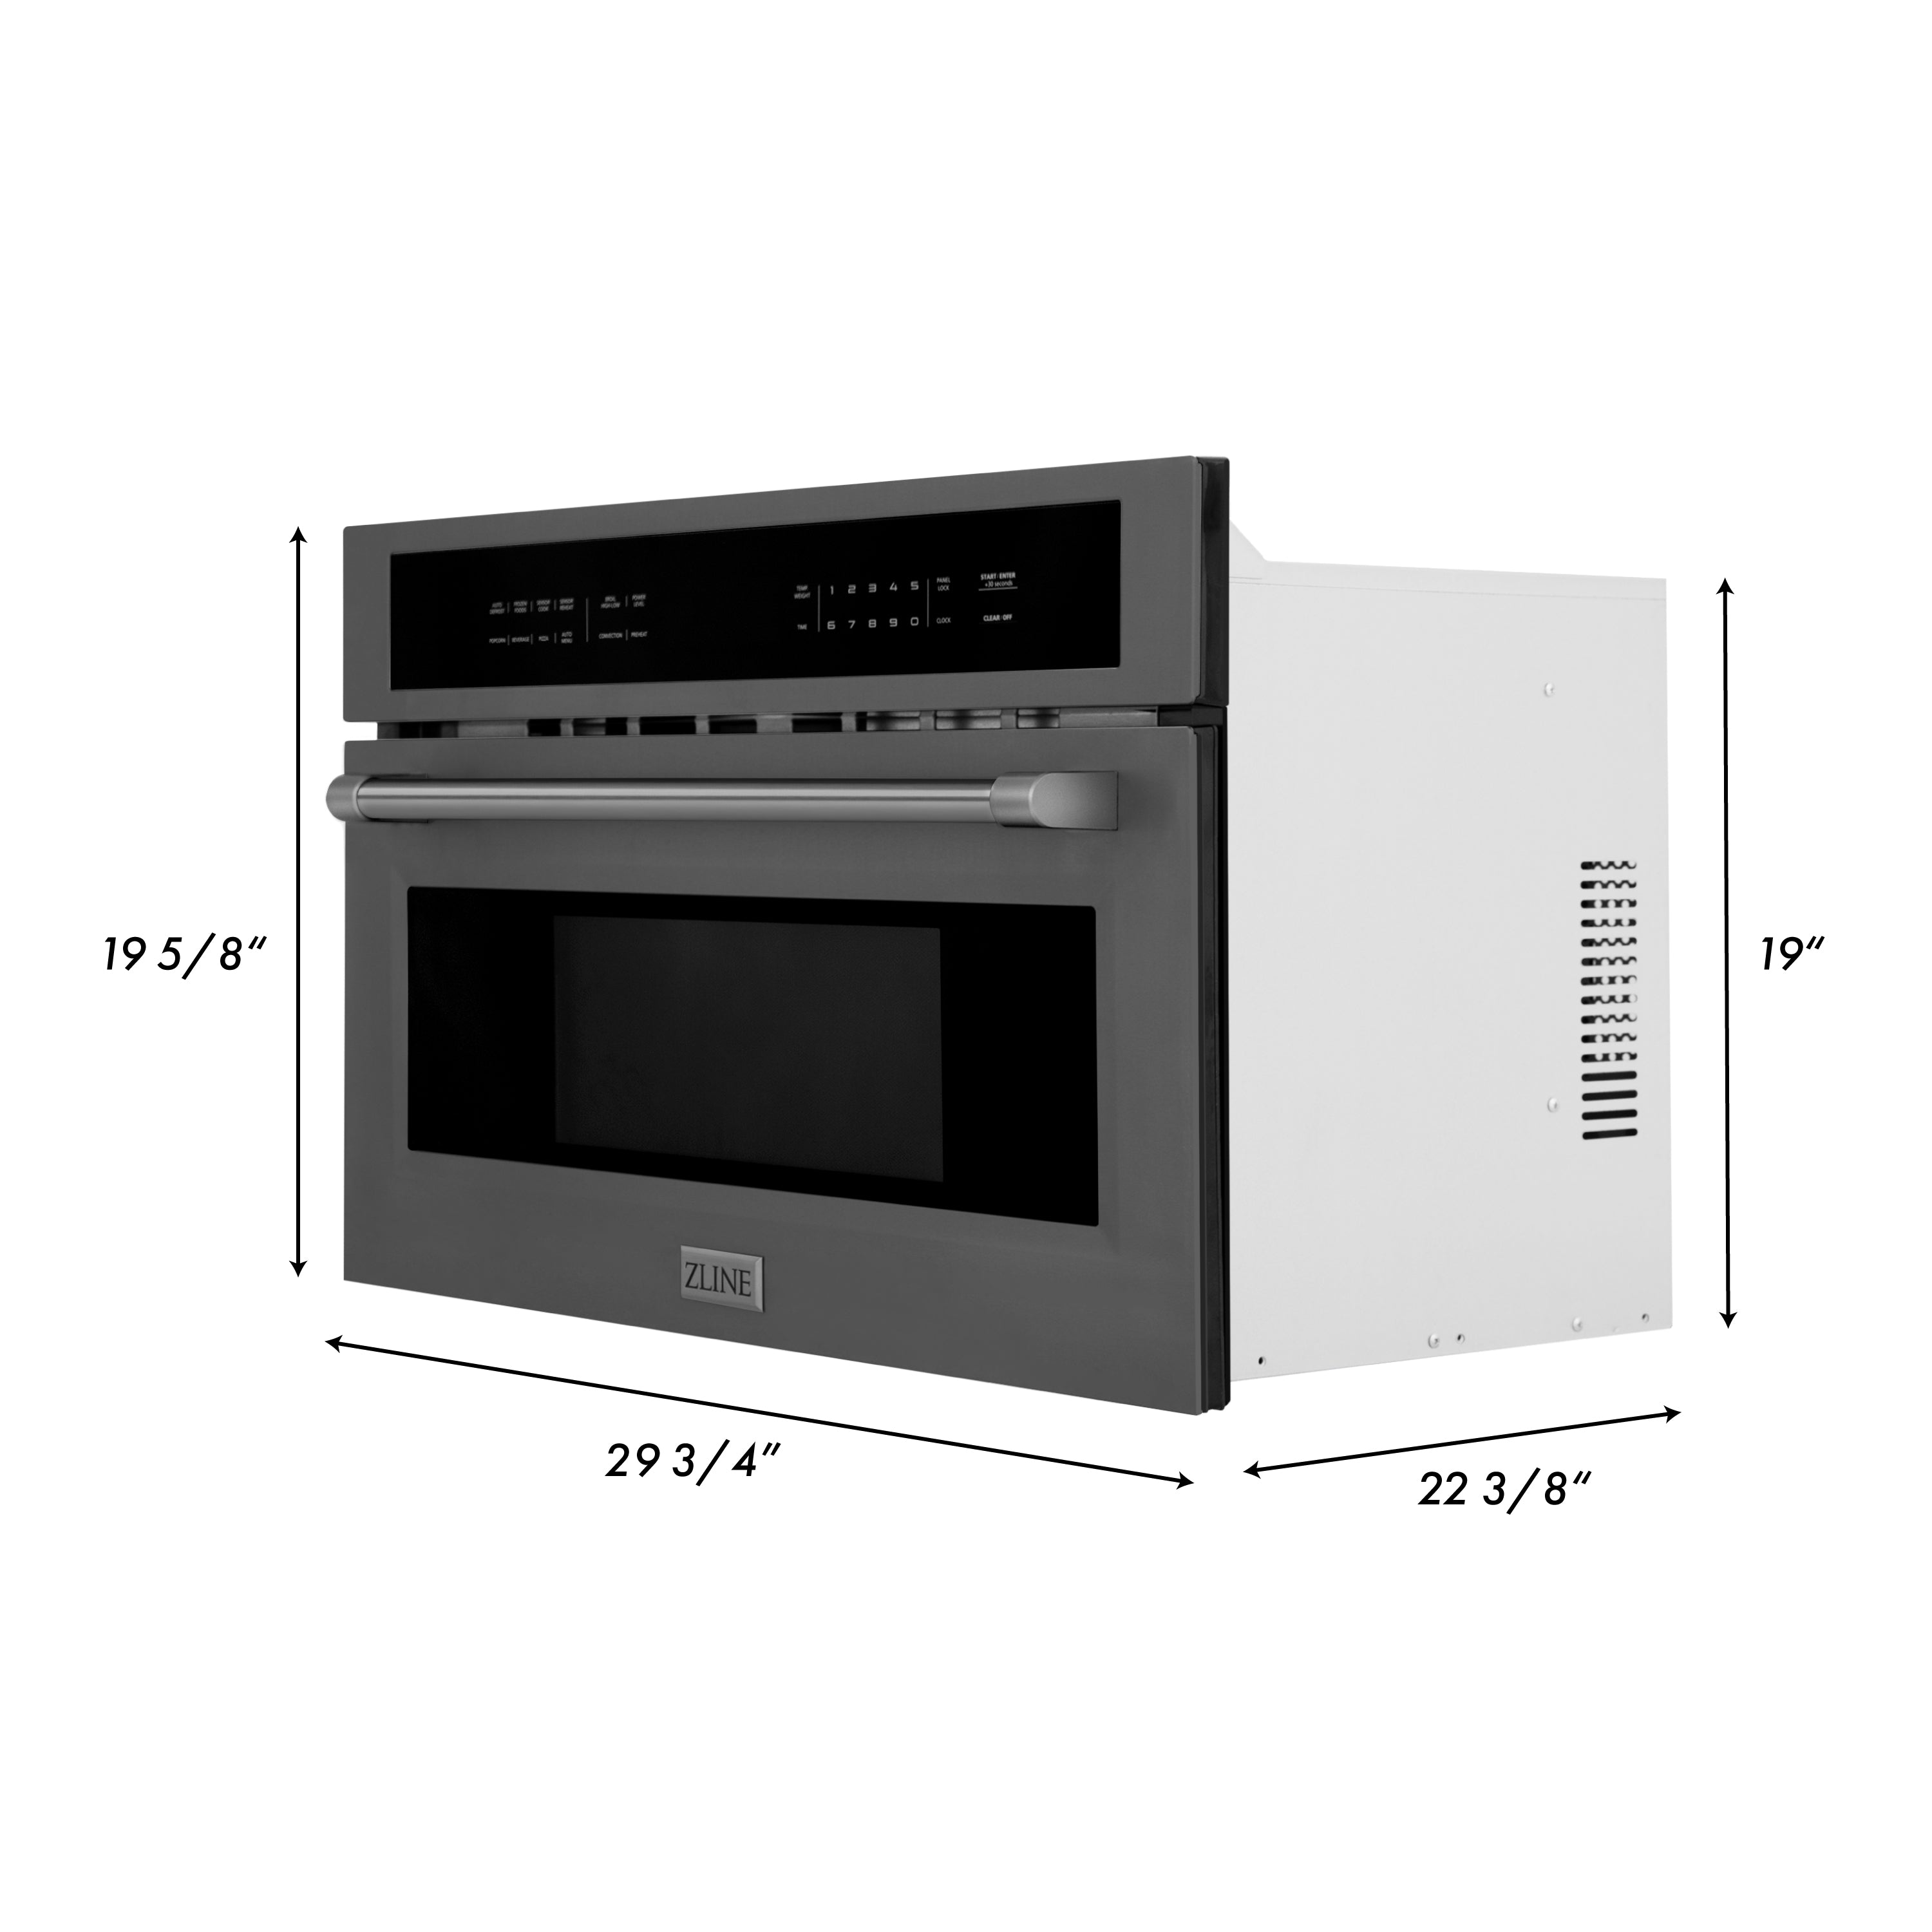 ZLINE 30 in. Microwave Oven in Black Stainless Steel with Traditional Handle (MWO-30-BS) - New Star Living